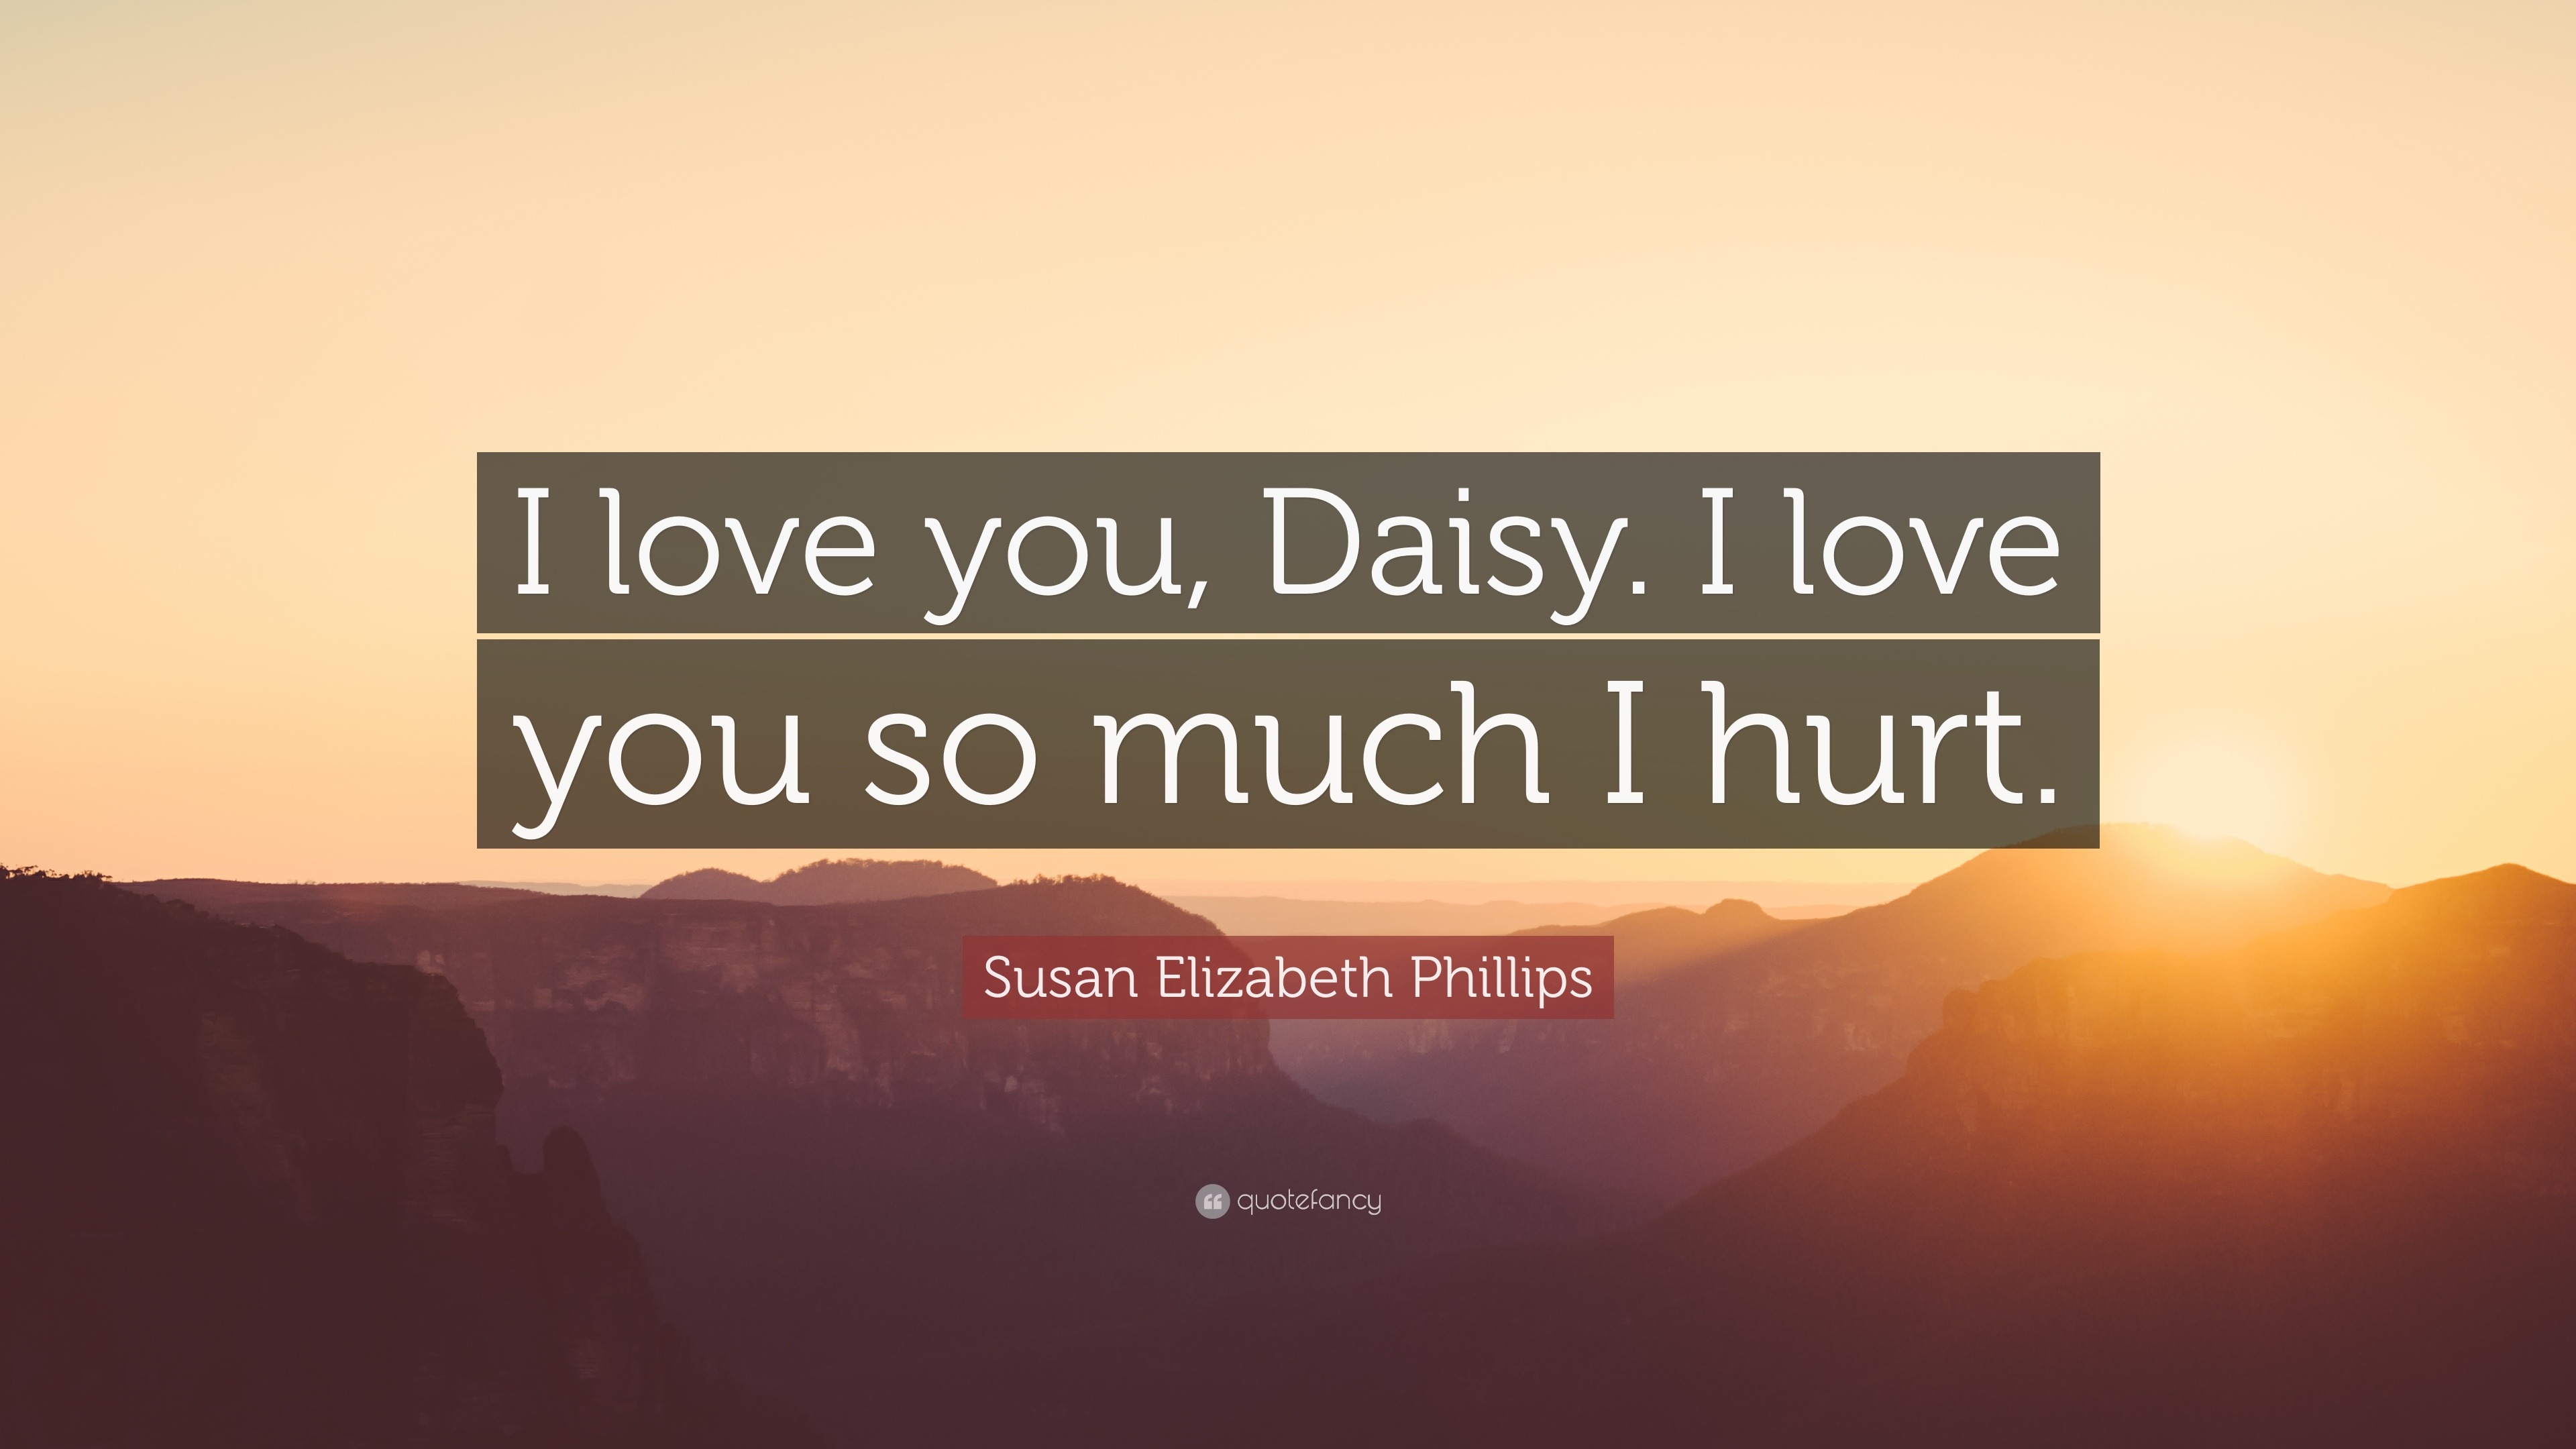 Susan Elizabeth Phillips Quote I Love You Daisy I Love You So Much I Hurt